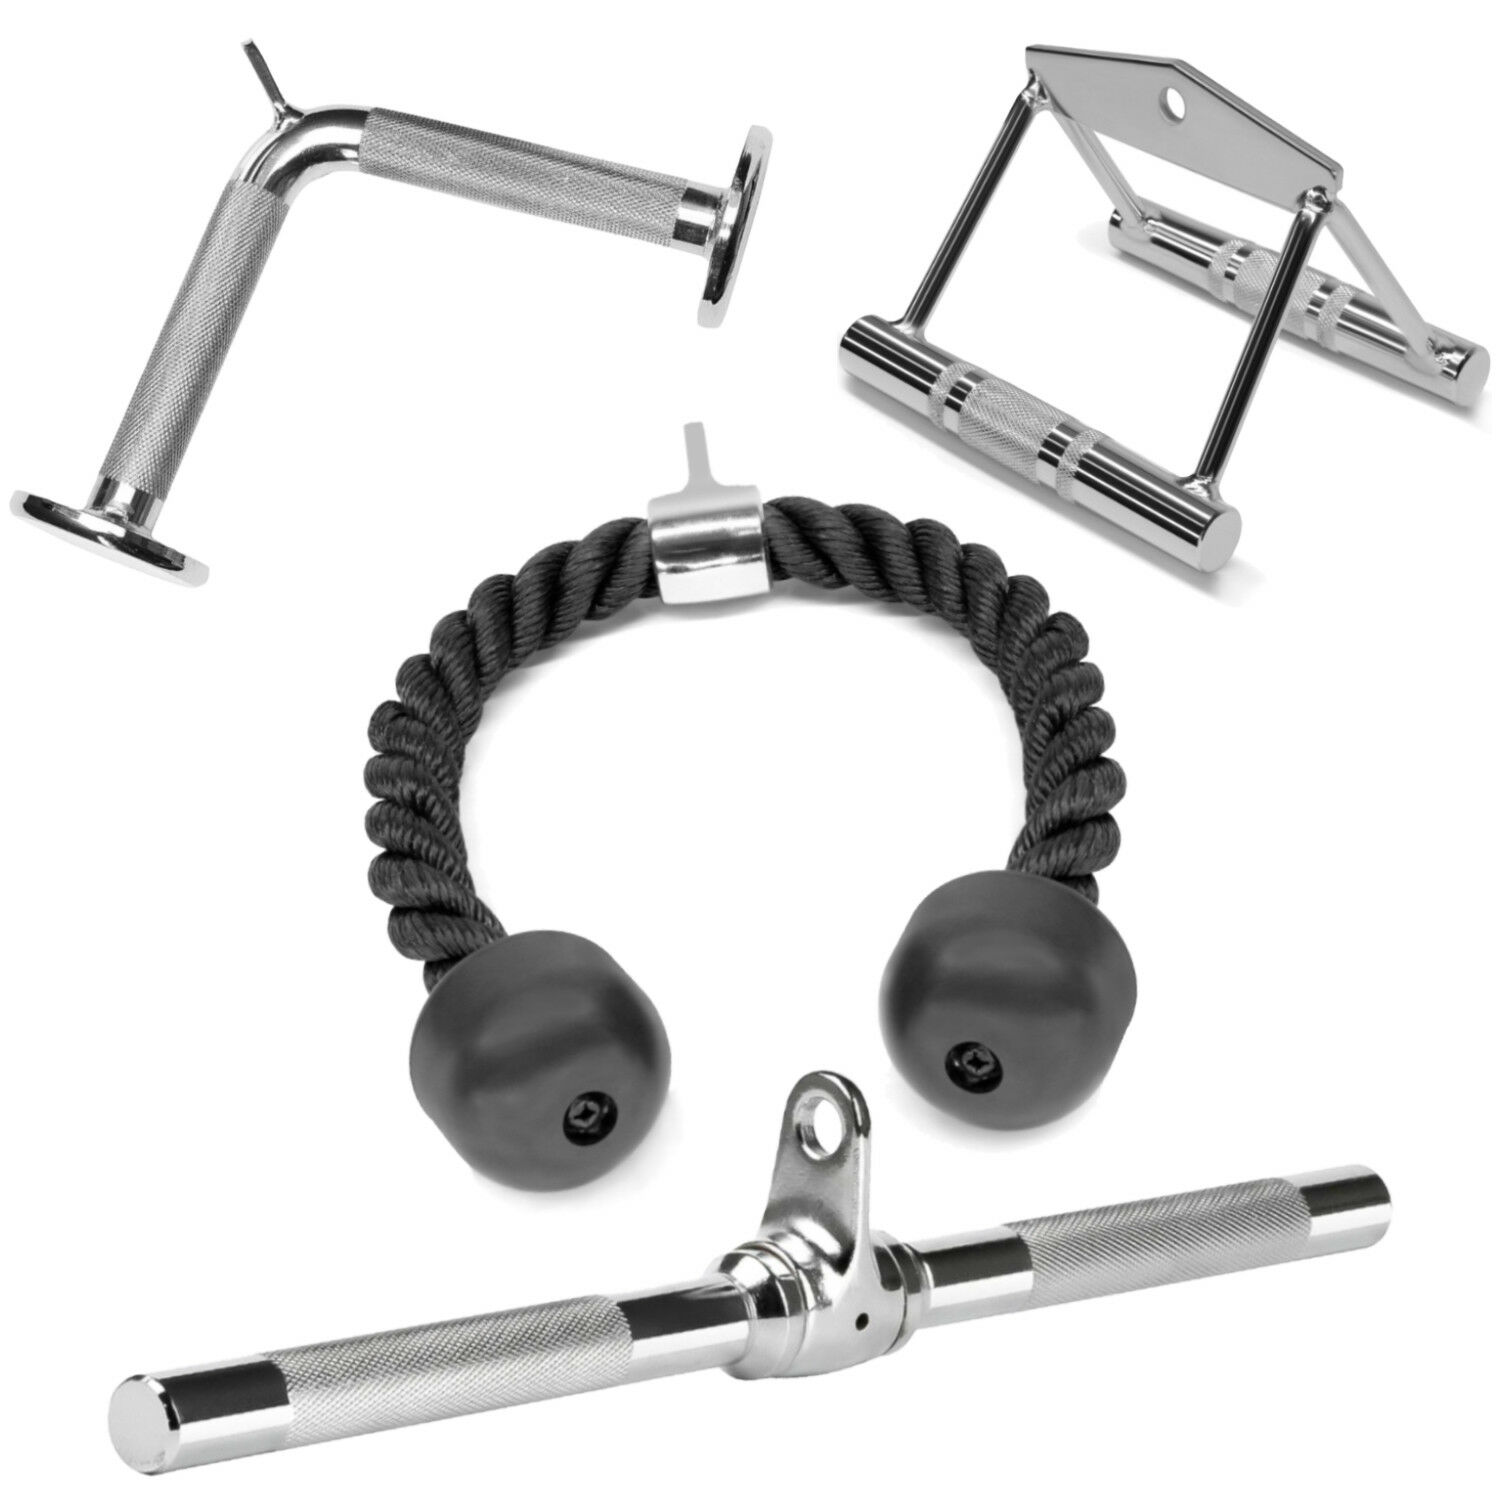 A2zcare Cable Attachments: Double D Handle, Tricep Rope, Rotating Bar, V Shaped